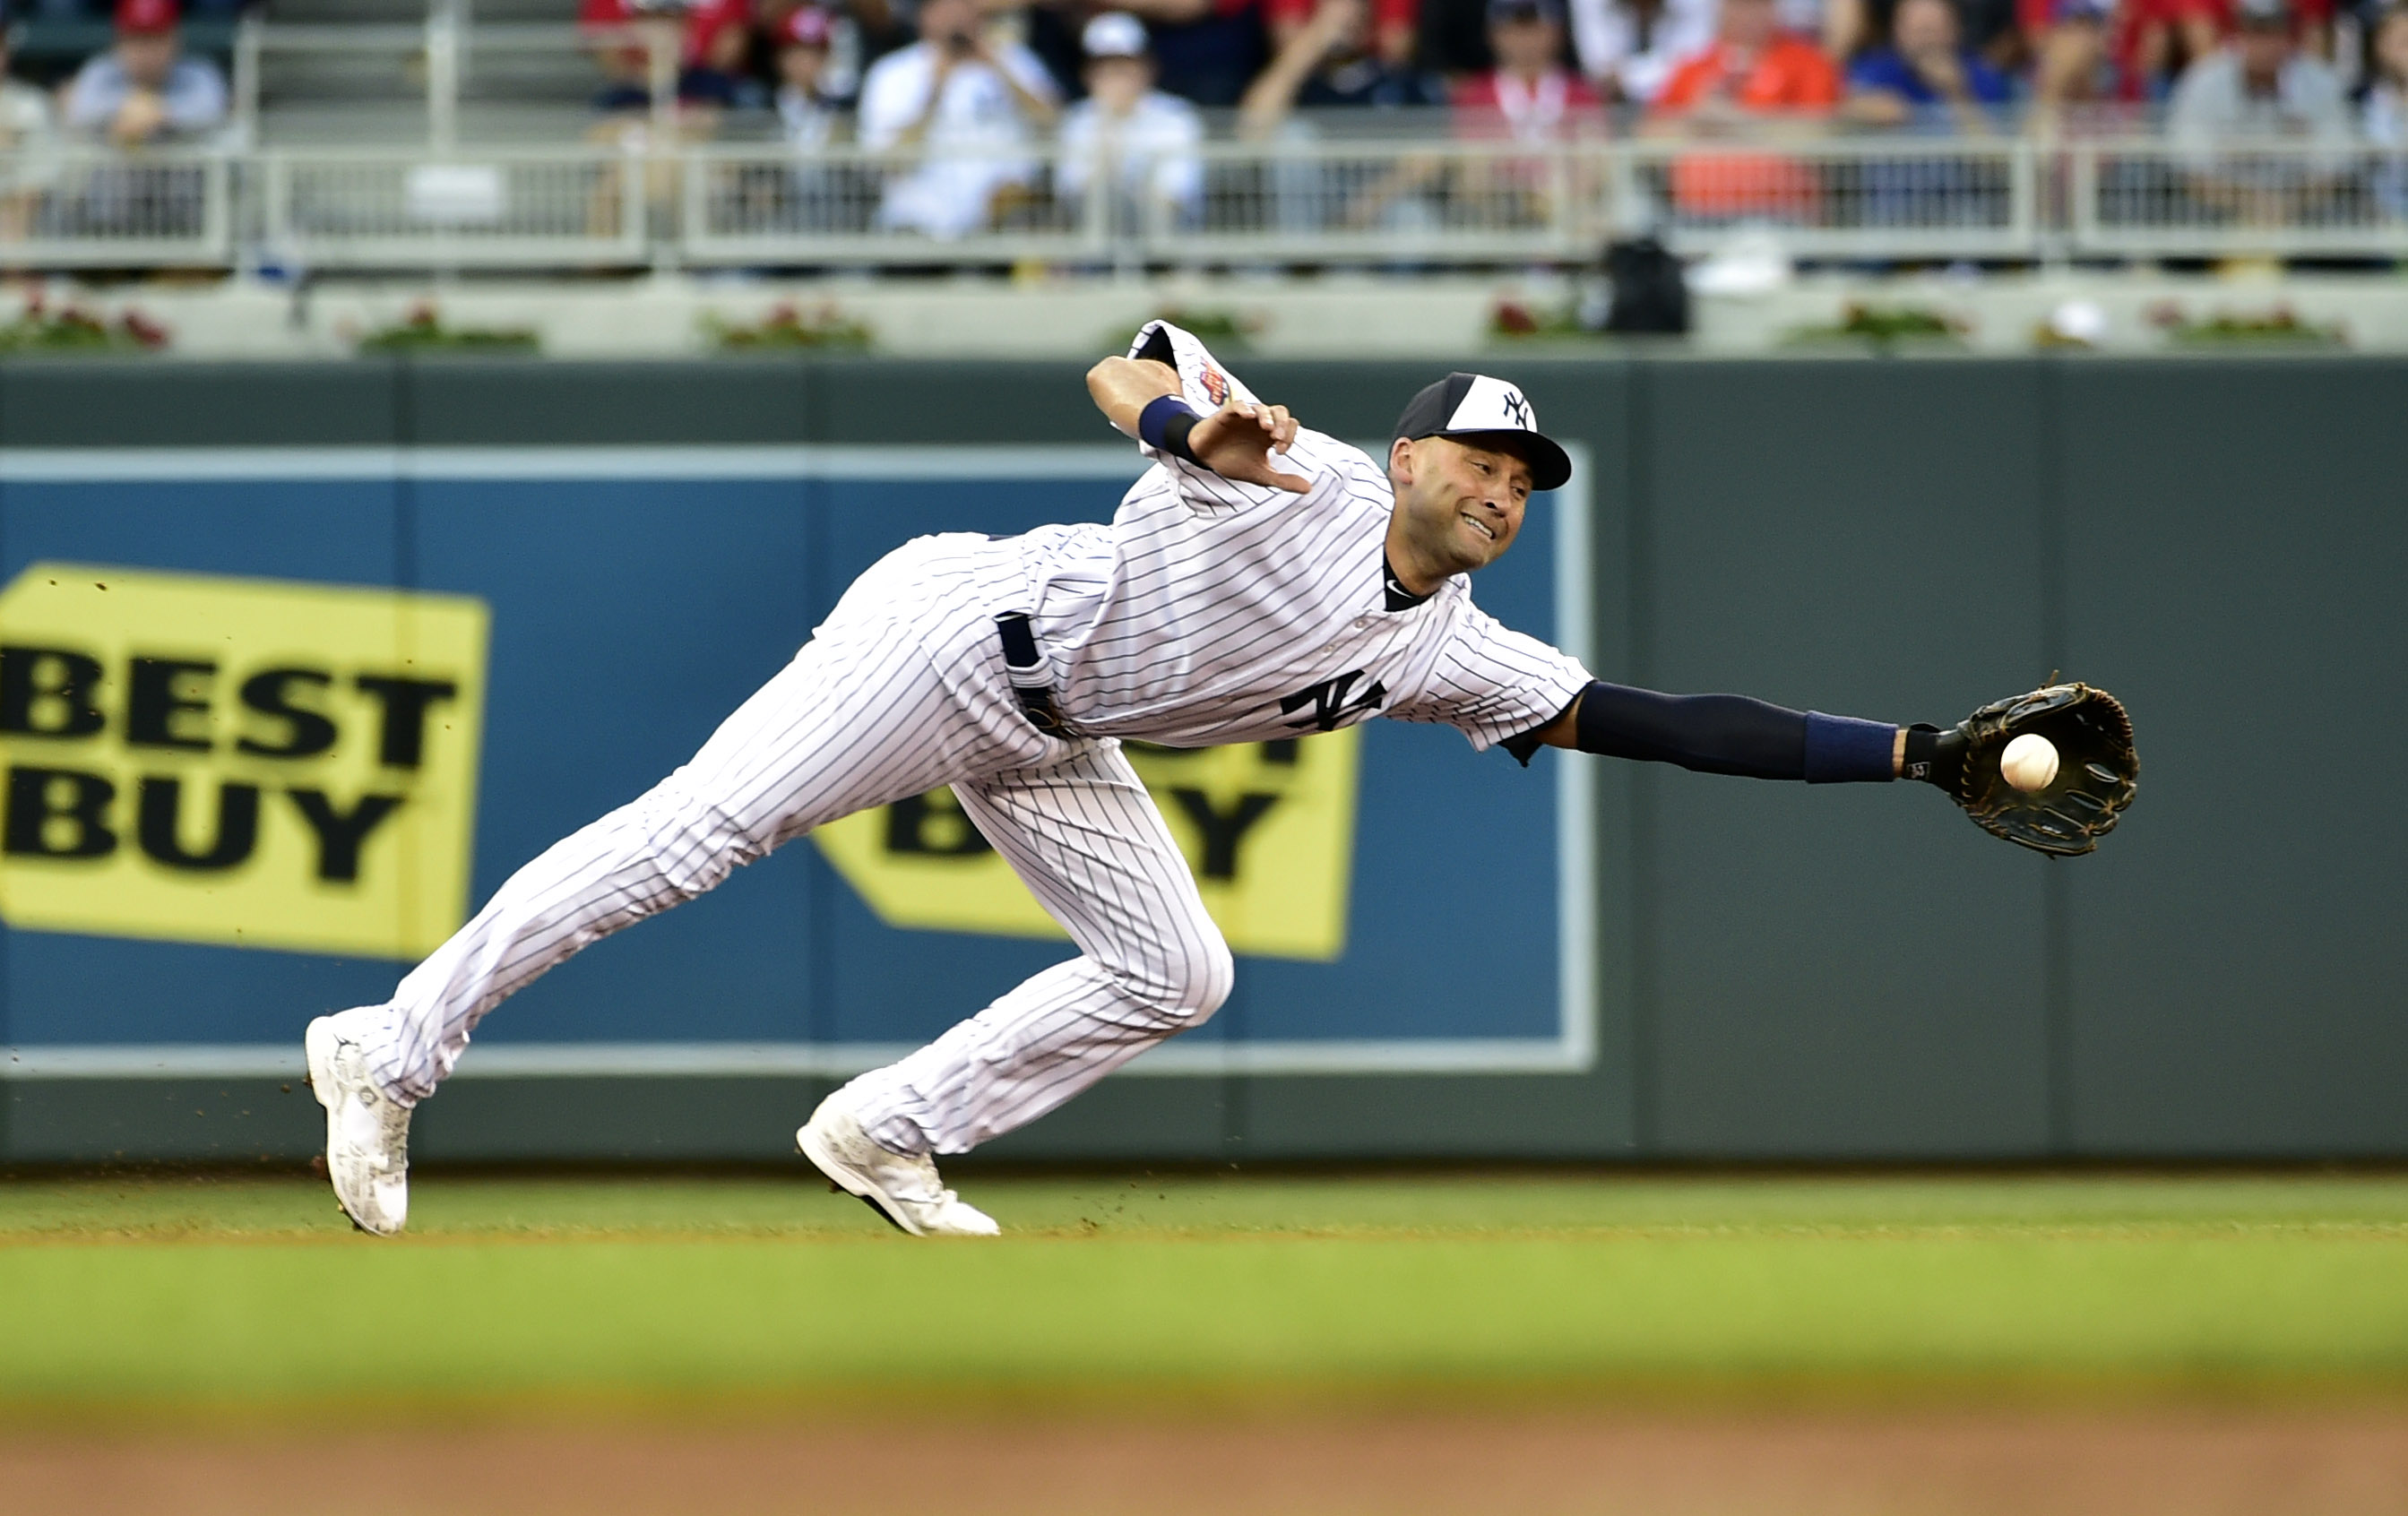 Derek Jeter makes a diving stop on a ball hit by Andrew McCutchen to lead off the 85 All-Star Game. (Scott Rovak, USA TODAY Sports)